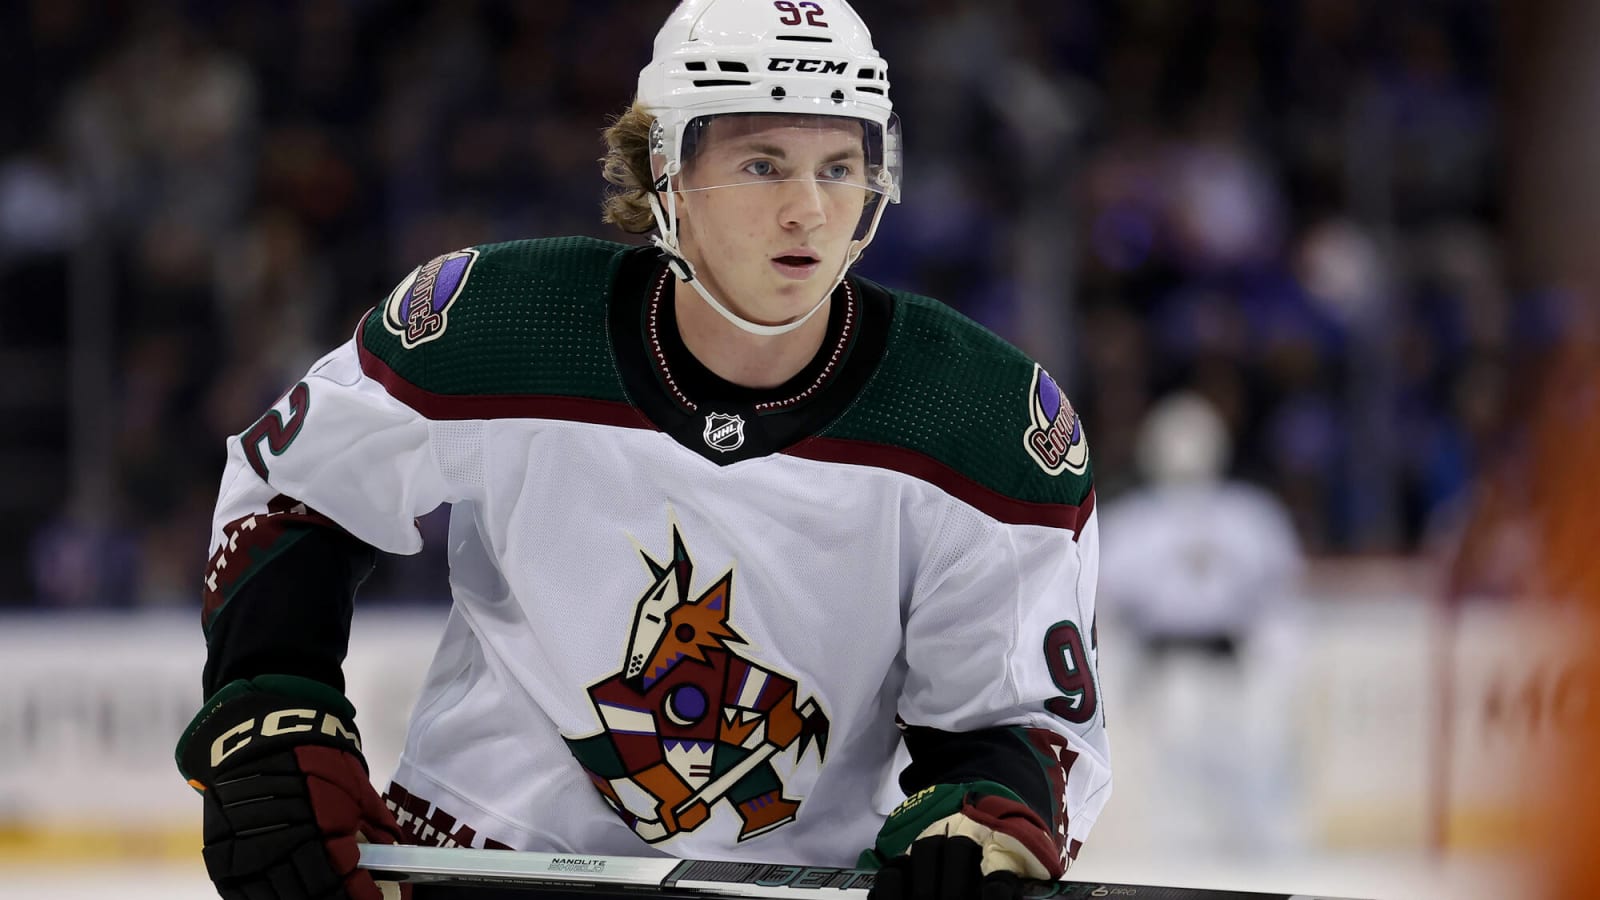 Can Coyotes rookie Logan Cooley continue the hot start?